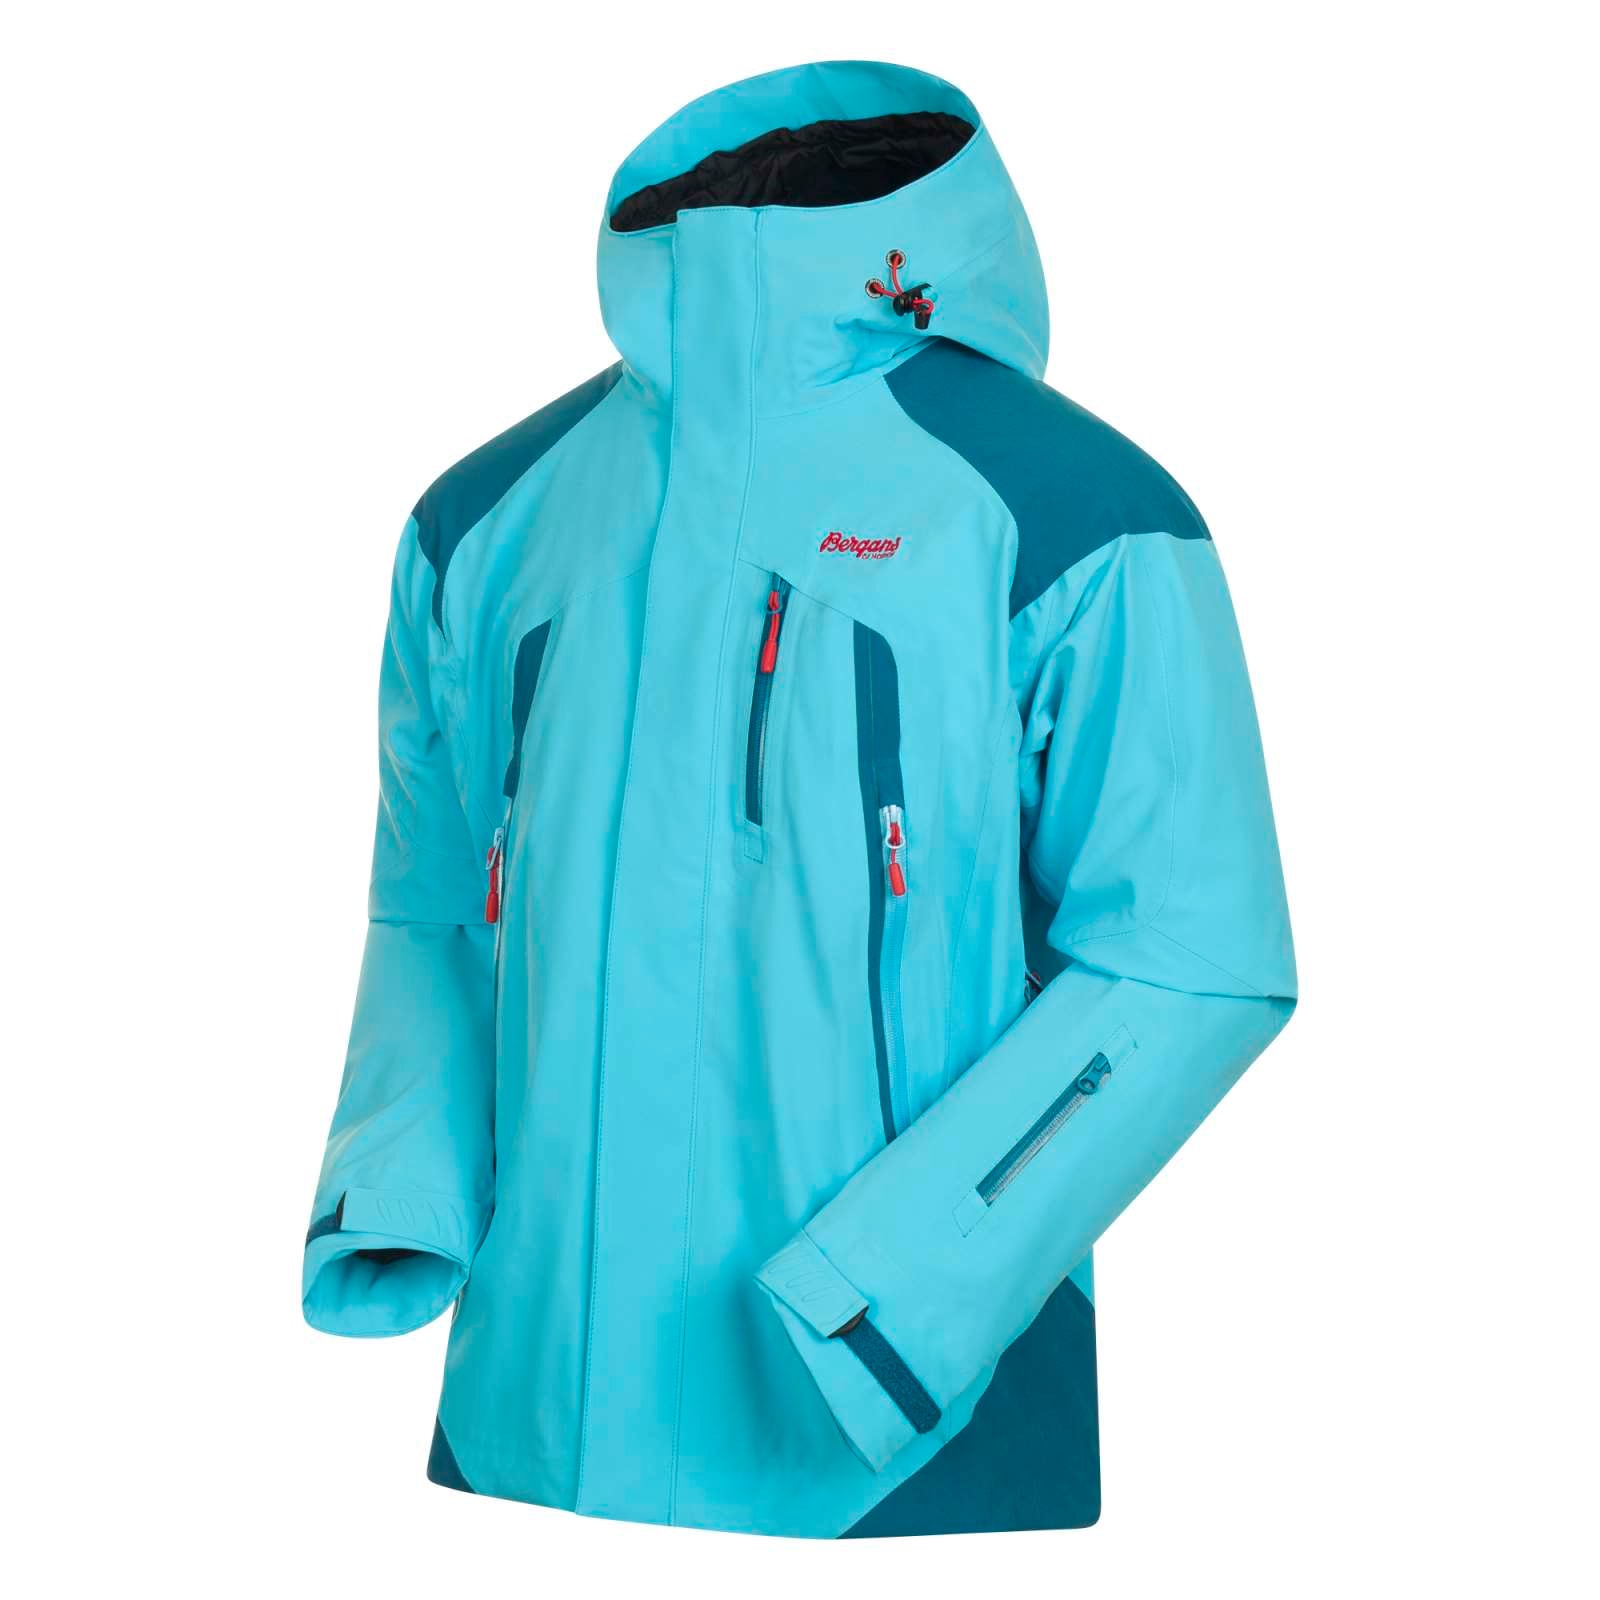 Buy Bergans Oppdal Insulated Jacket from